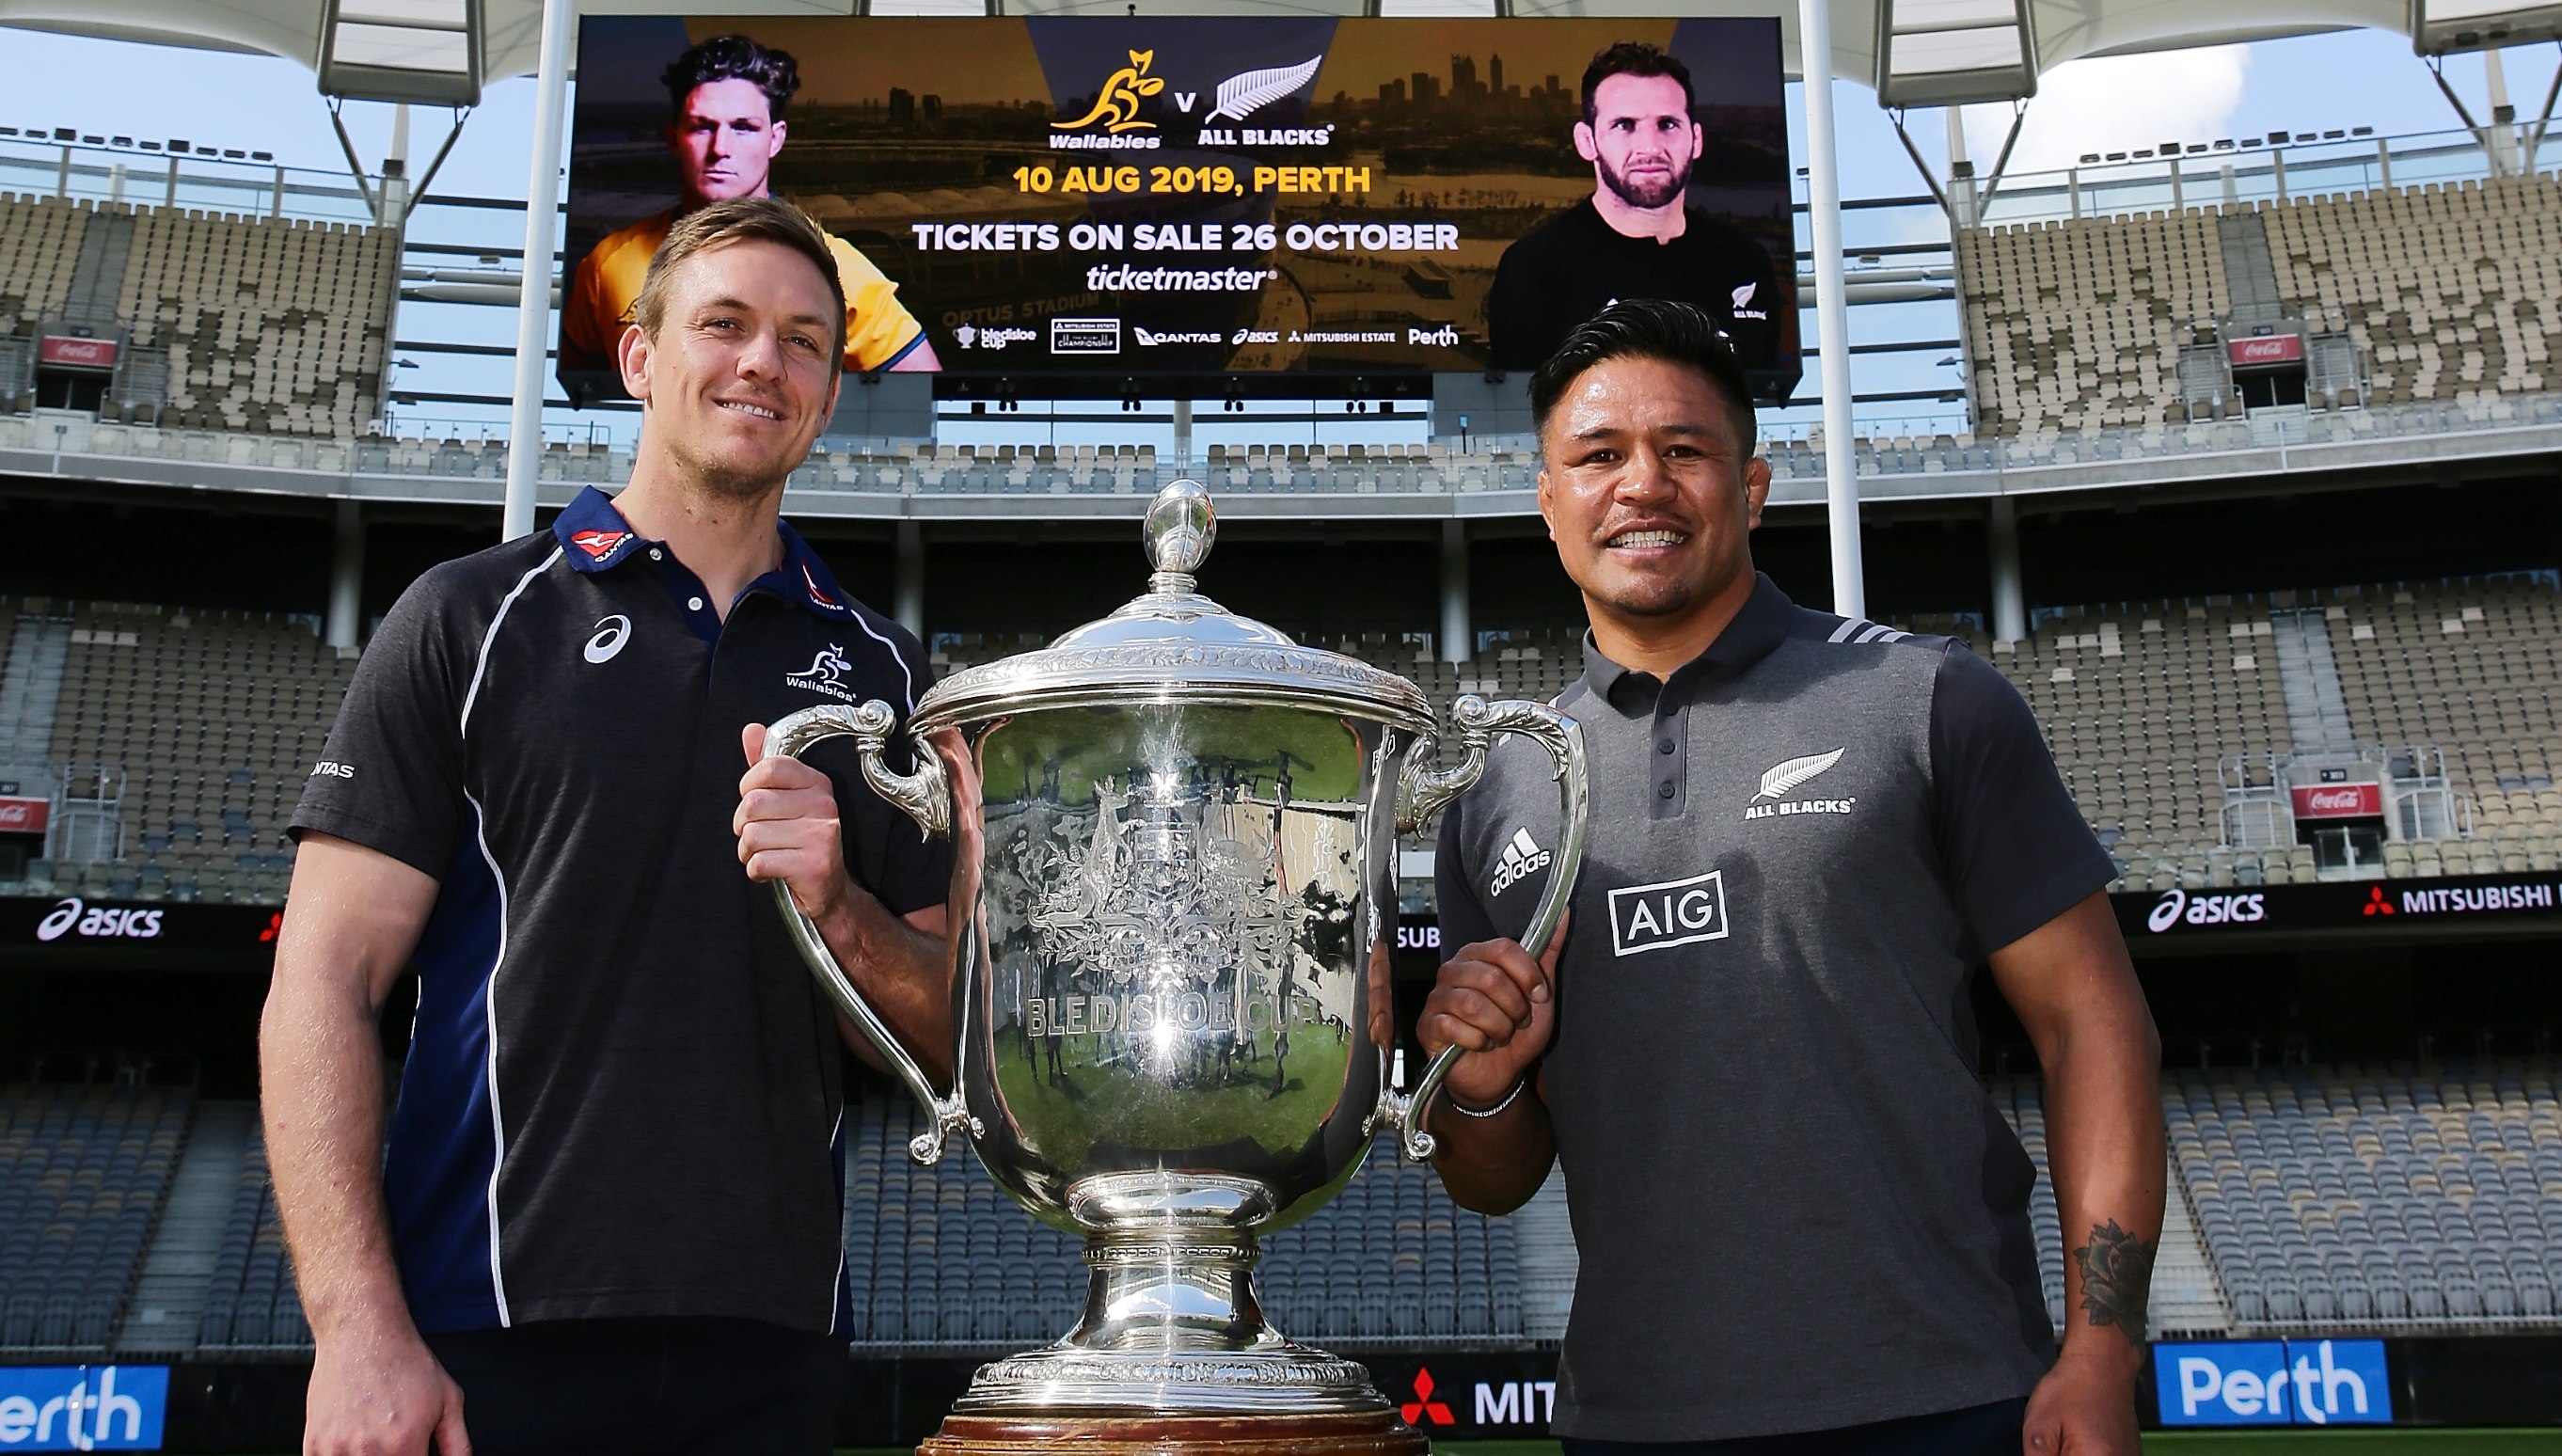 Rugby news All Blacks to face Wallabies in Bledisloe Cup match in Perth